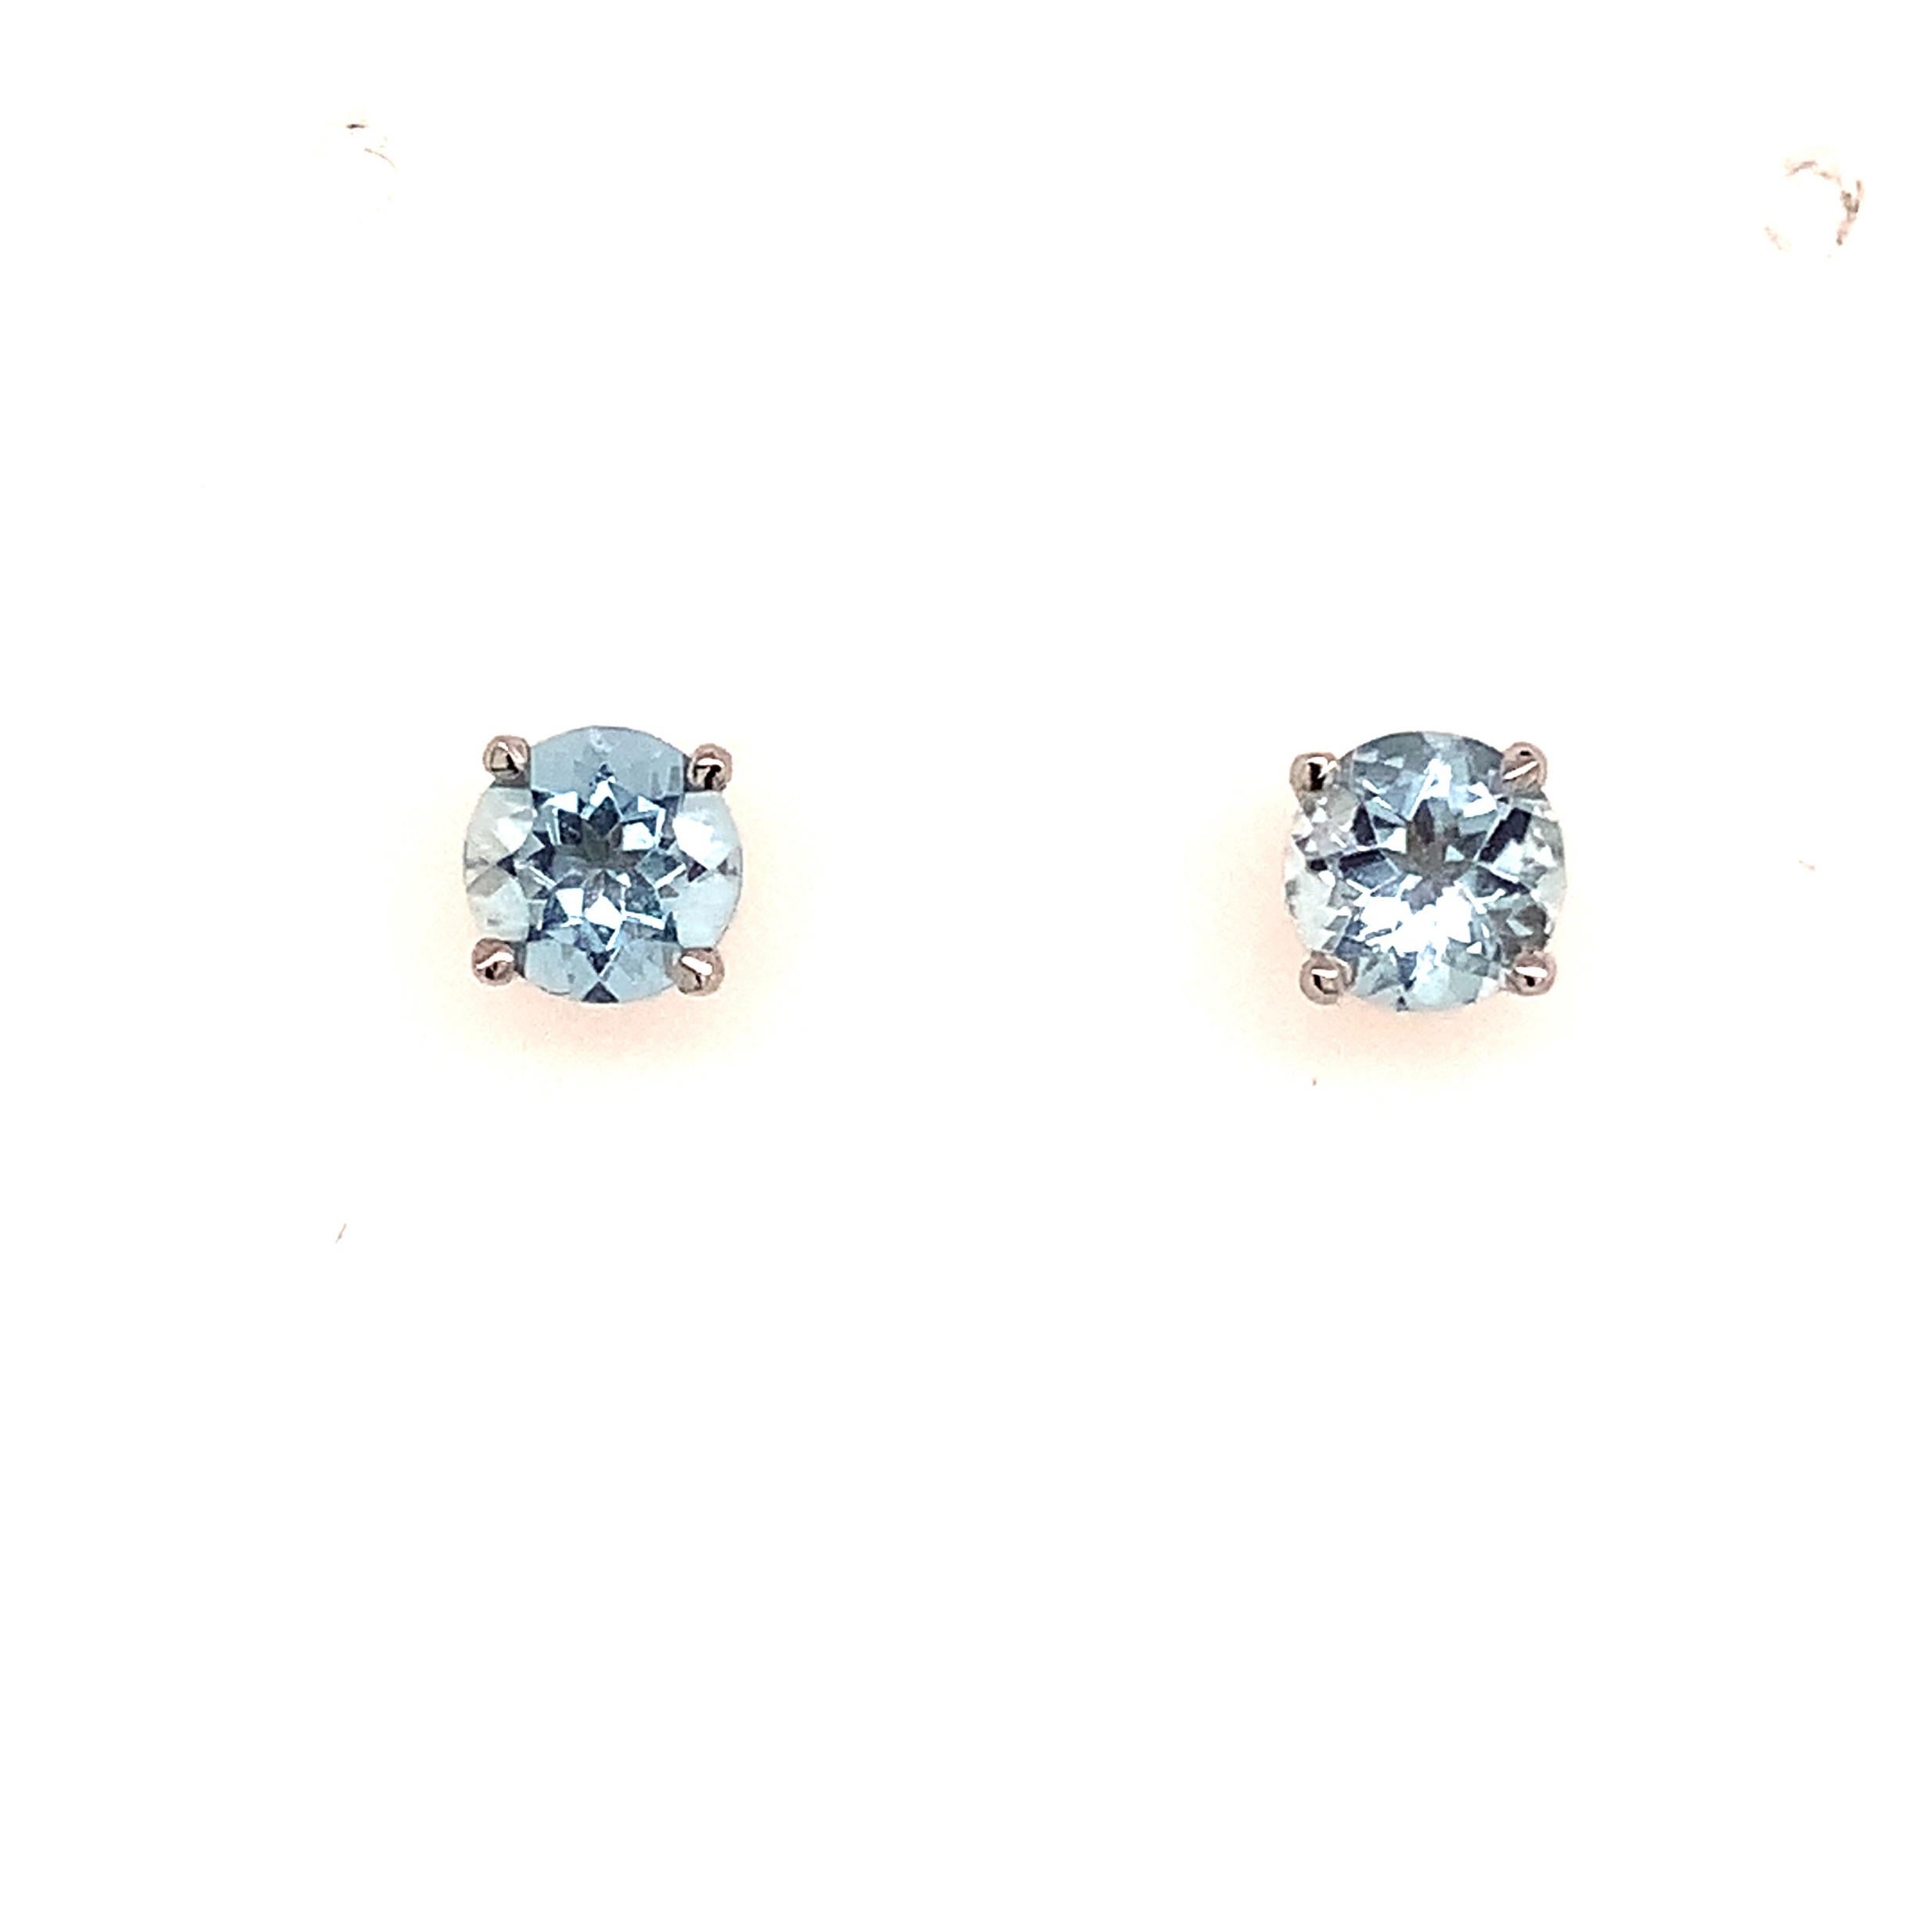 Natural Finely Faceted Quality Aquamarine Stud Earrings 14k White Gold 1.0 TCW Certified $590 111539

This is a Unique Custom Made Glamorous Piece of Jewelry!

Nothing says, “I Love you” more than Diamonds and Pearls!

These Aquamarine earrings have